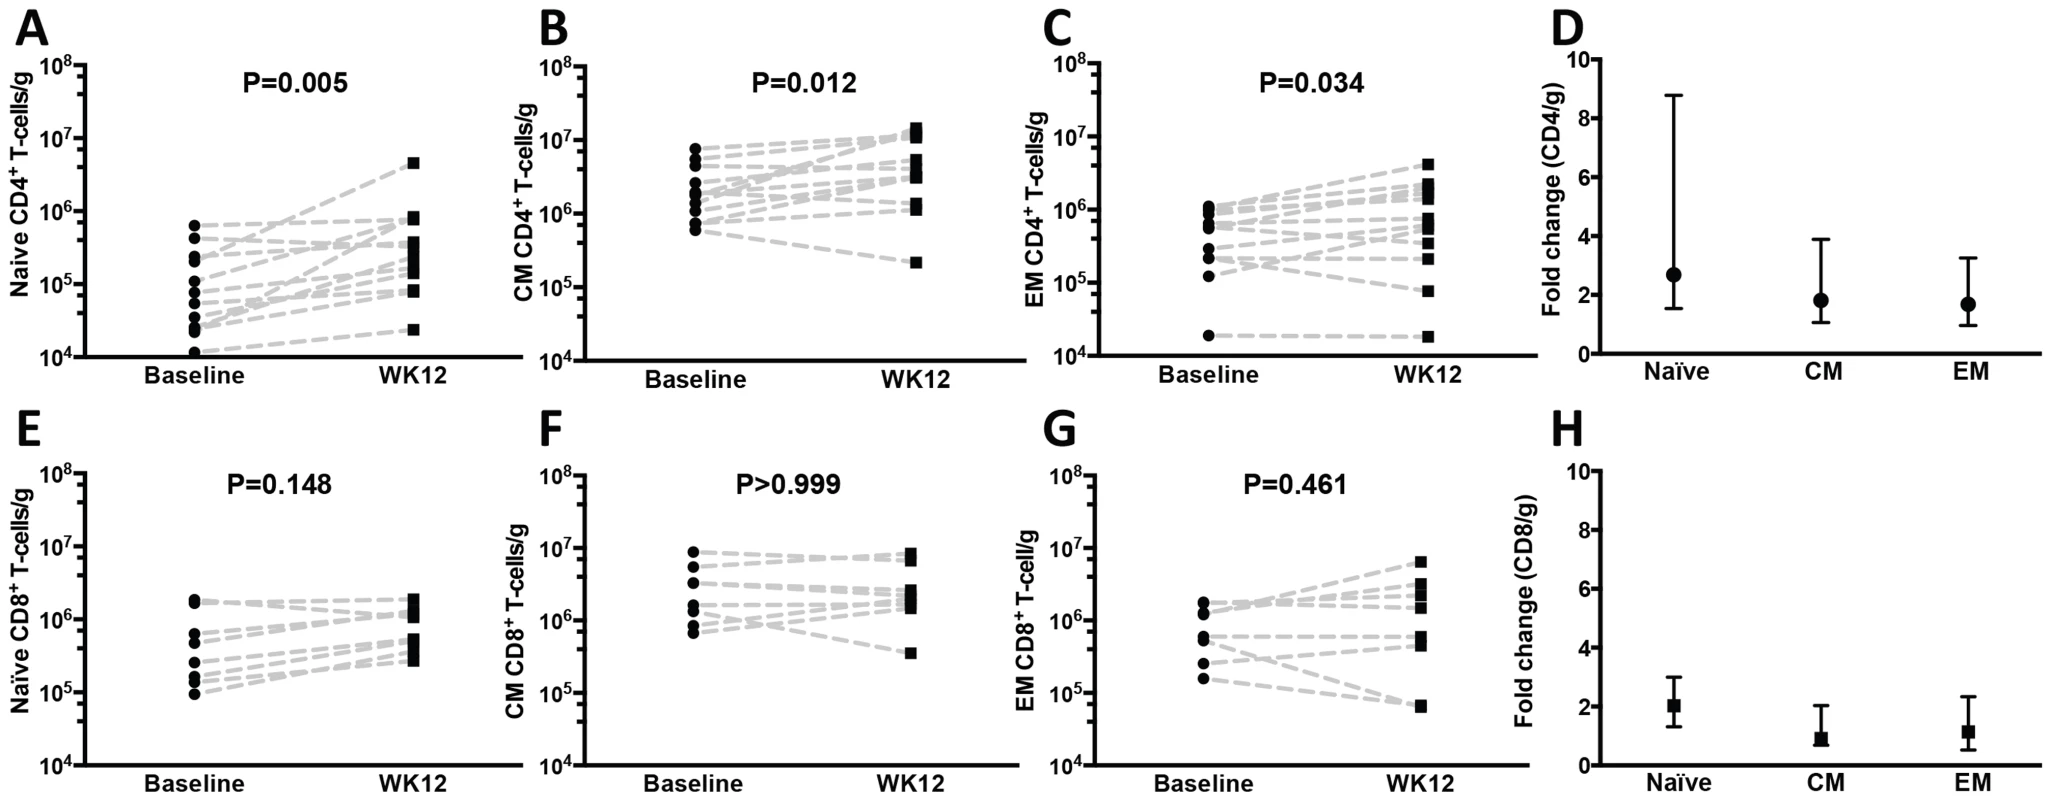 Naïve, central and effector memory colonic mucosal CD4<sup>+</sup> T cells increase after r-hIL-7 administration.